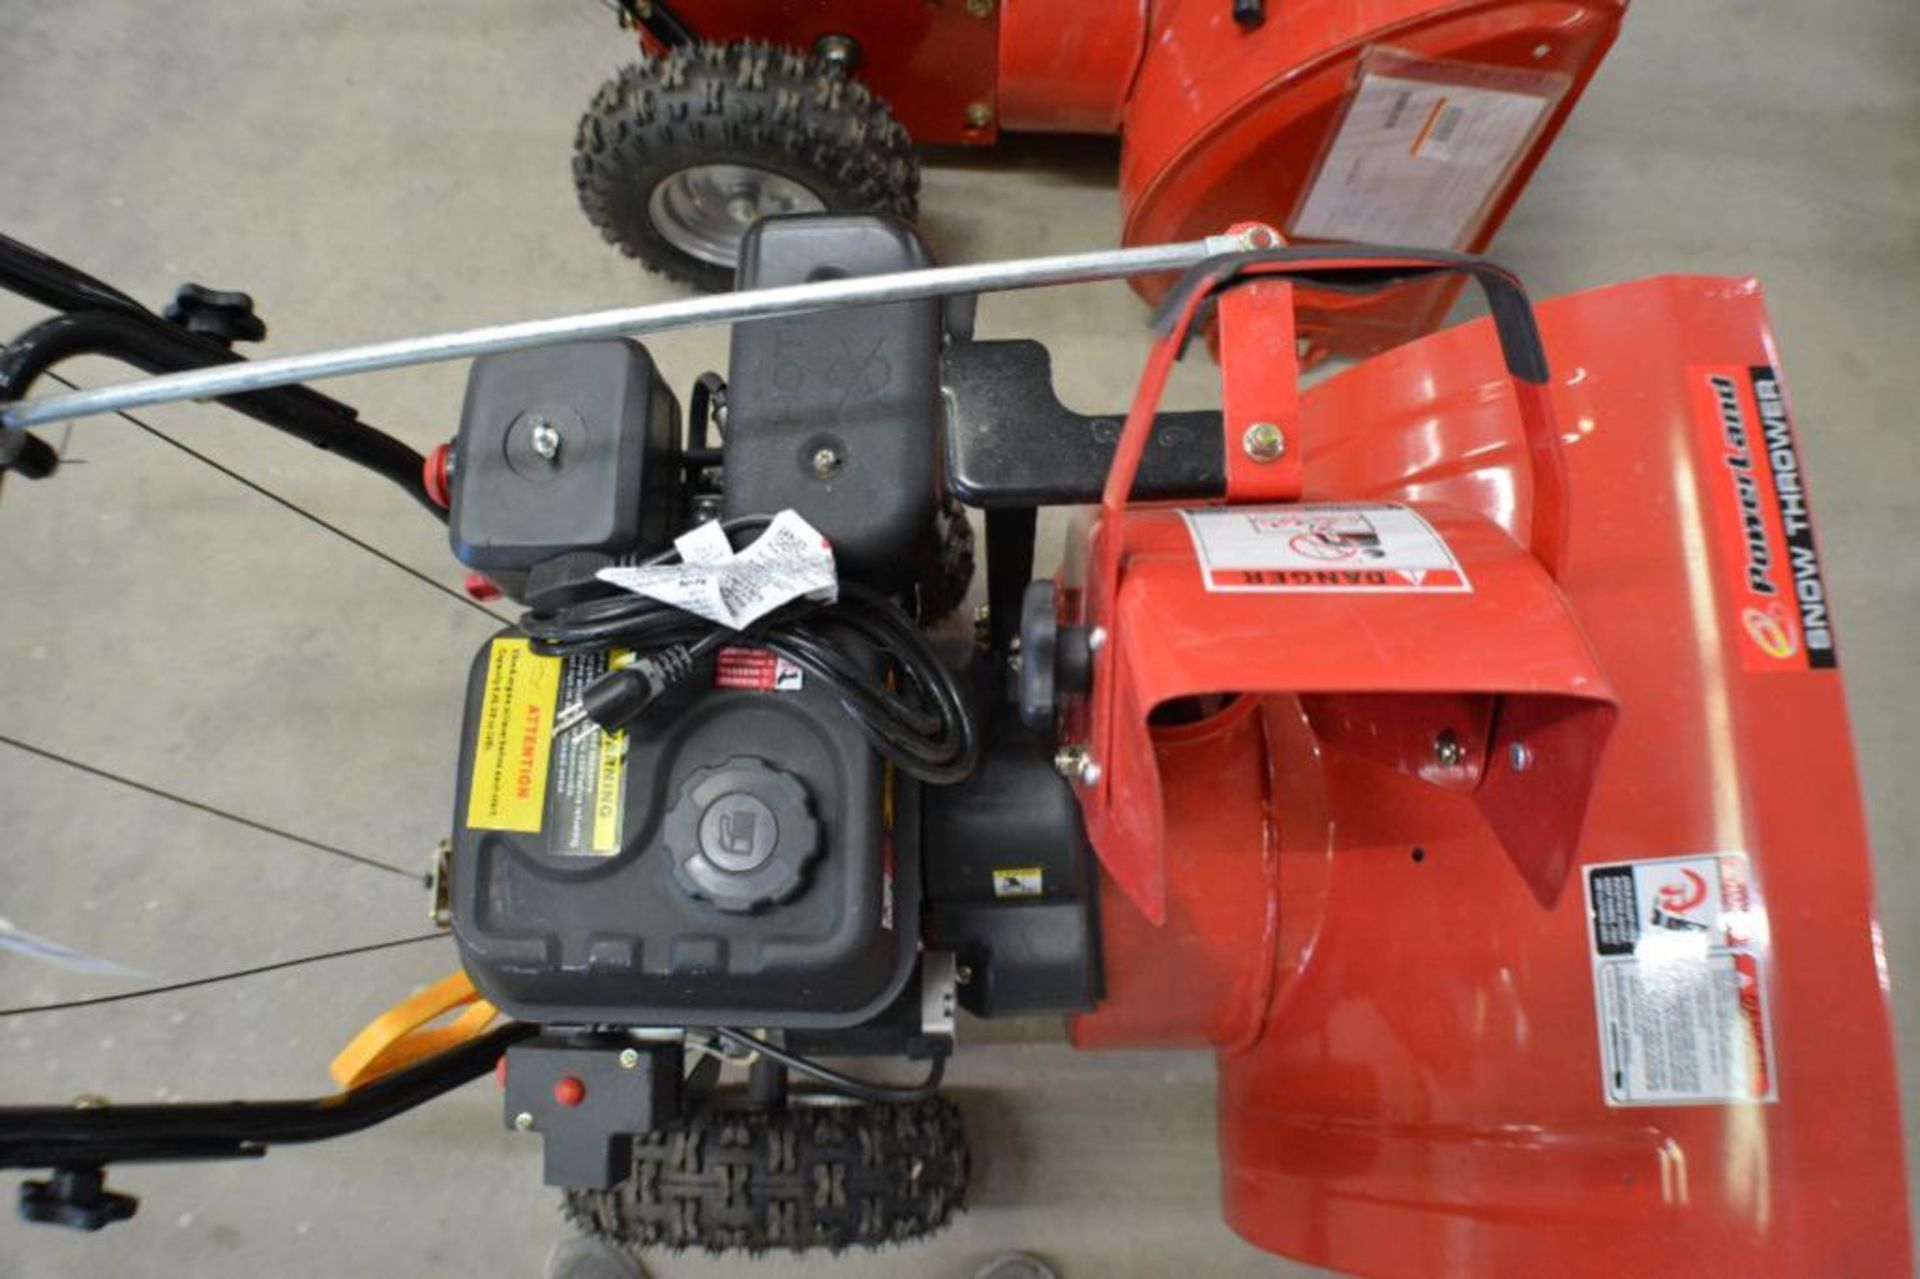 Snow Thrower 24in. 6.5HP with electric Start Engine 4 Stroke by Powerland - Image 5 of 6